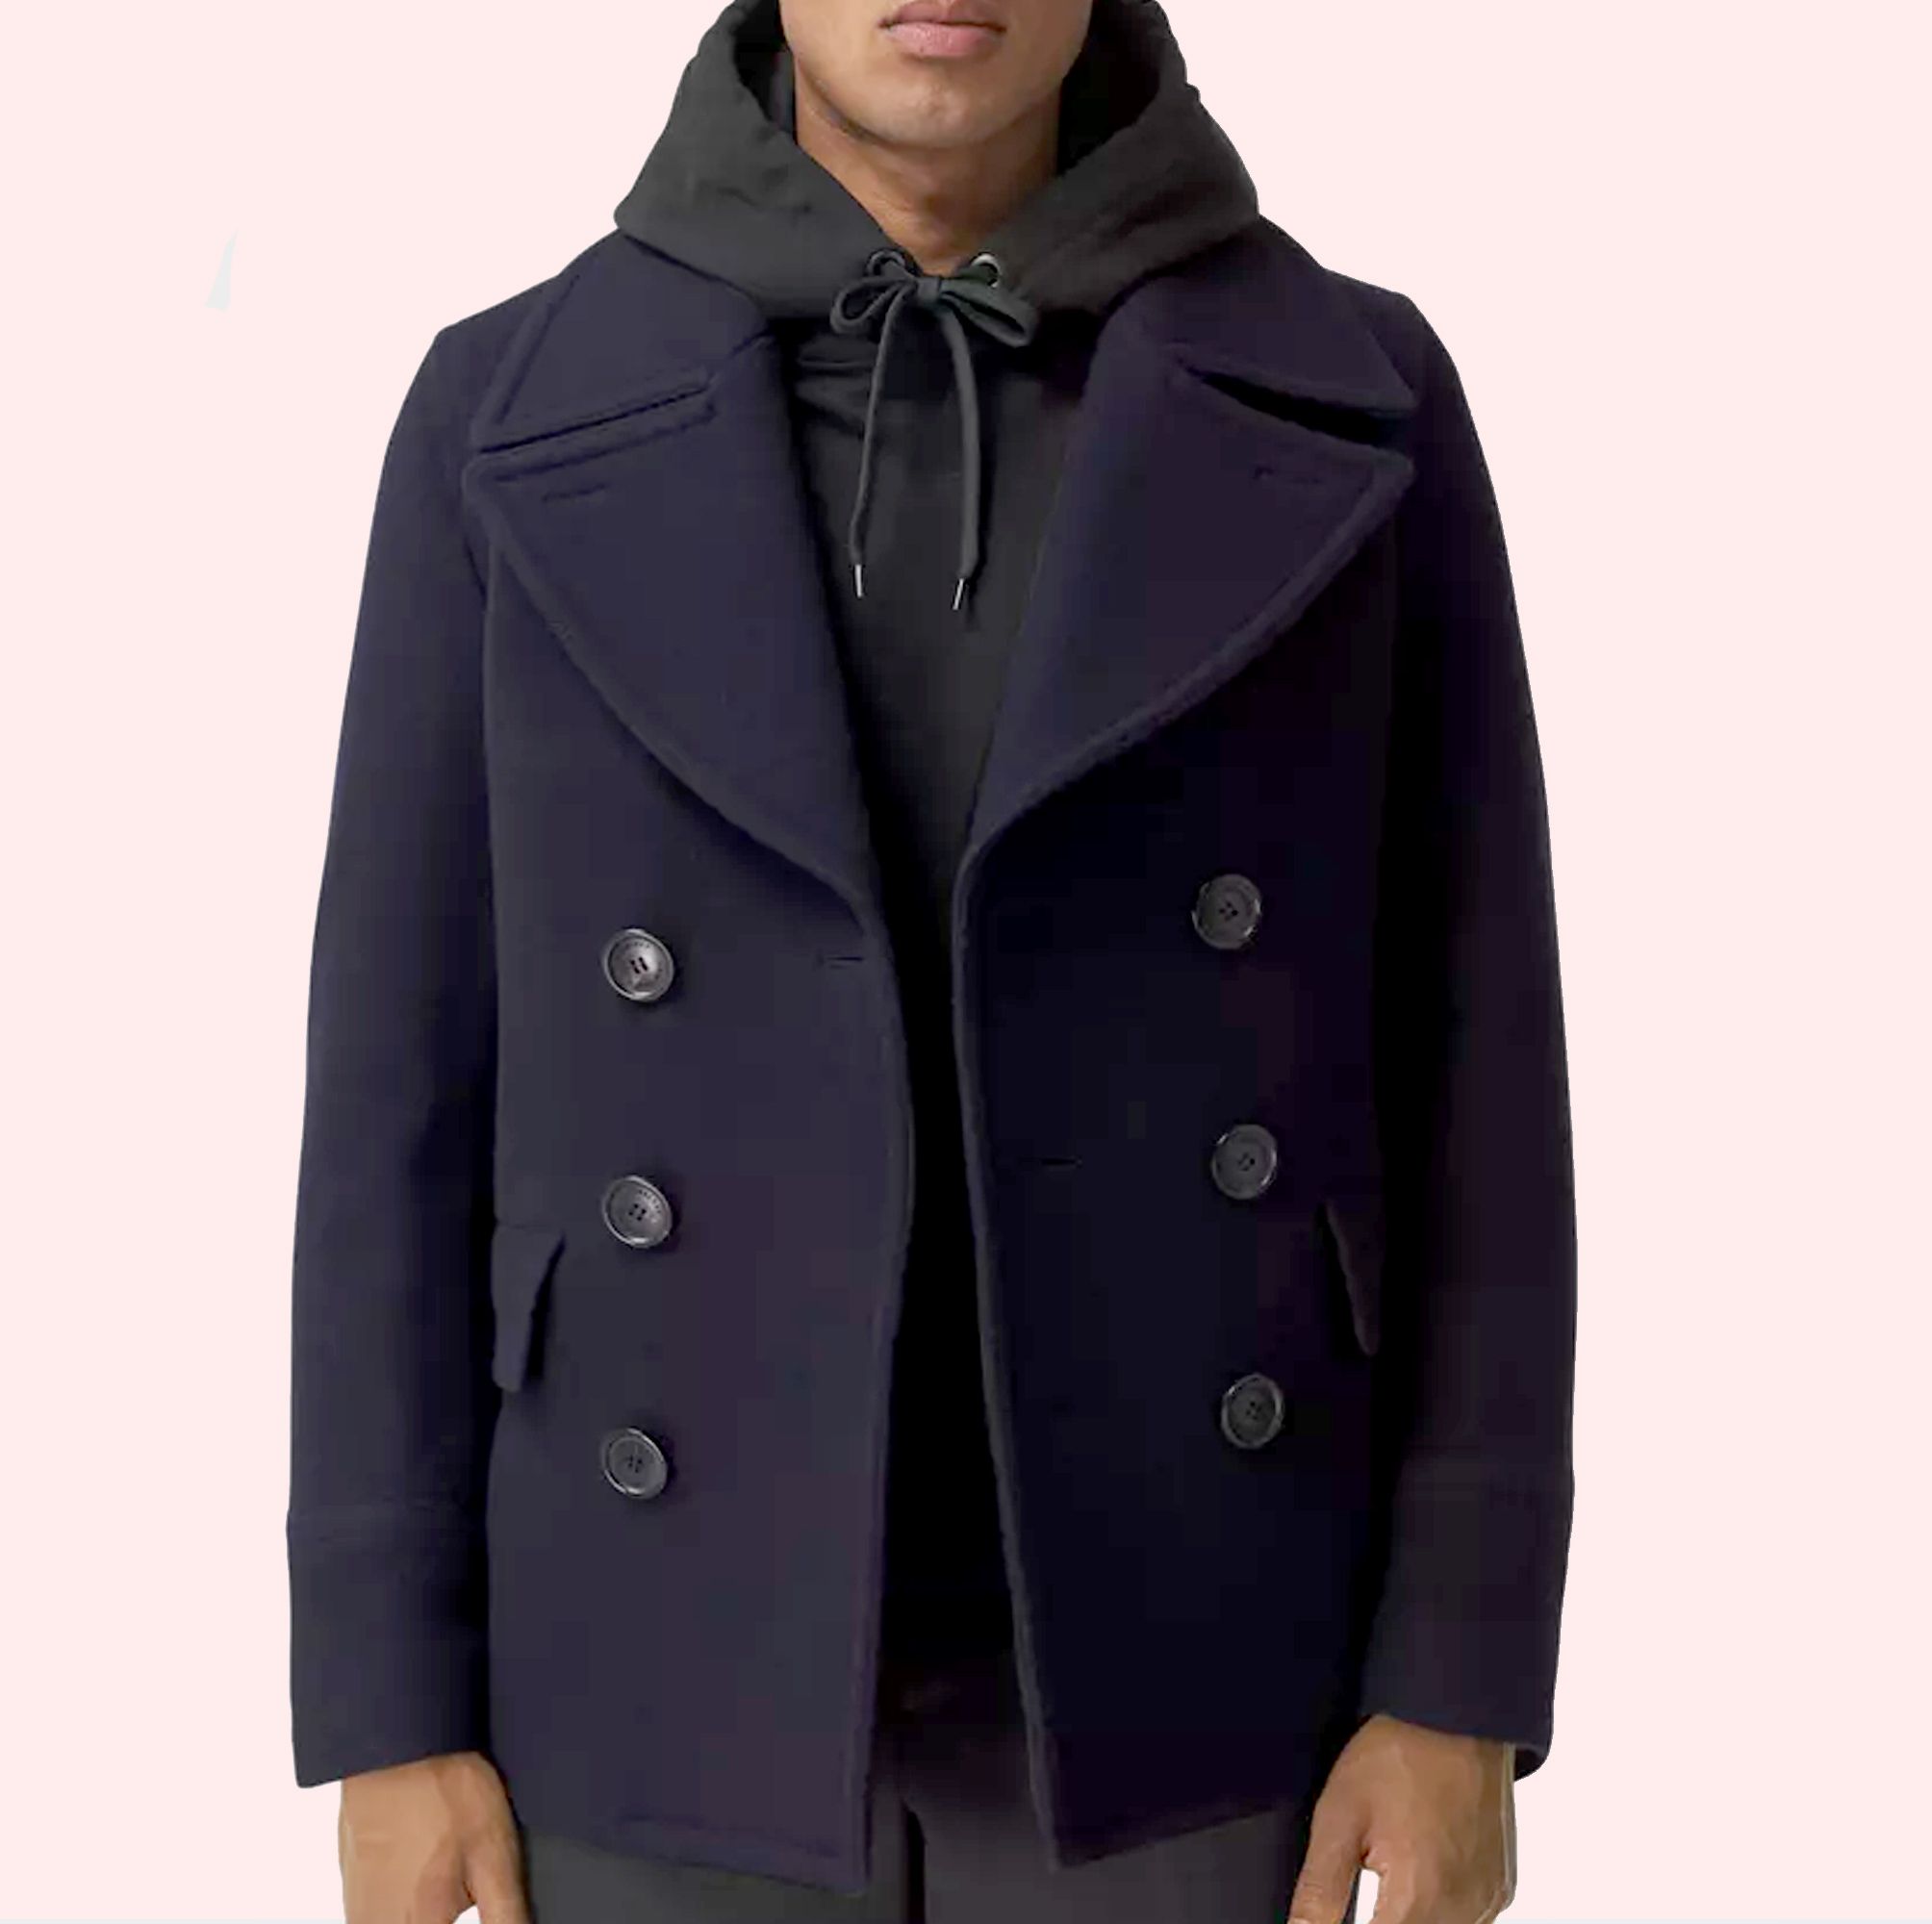 The Best Peacoats Will Make You Look Like the Leading Man of Your Own Movie